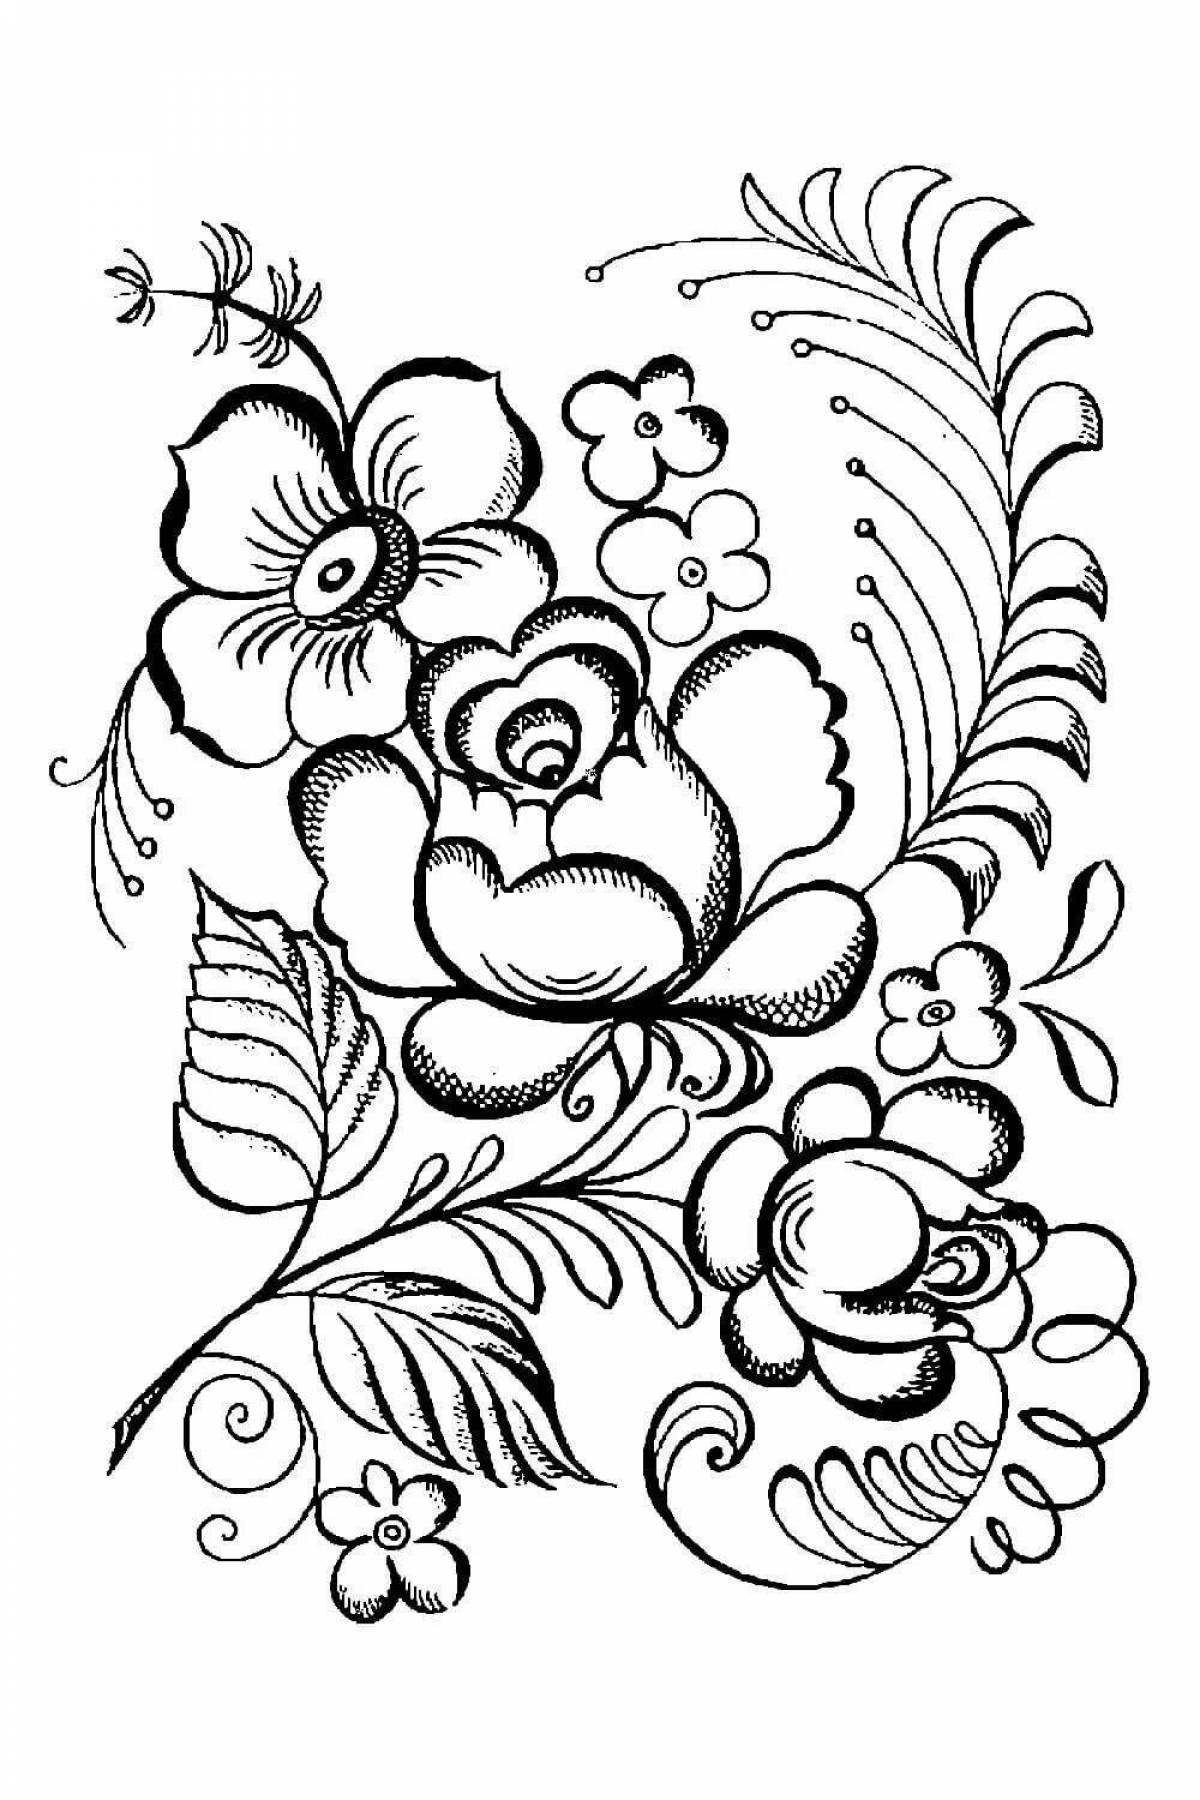 Coloring page with Russian ornaments